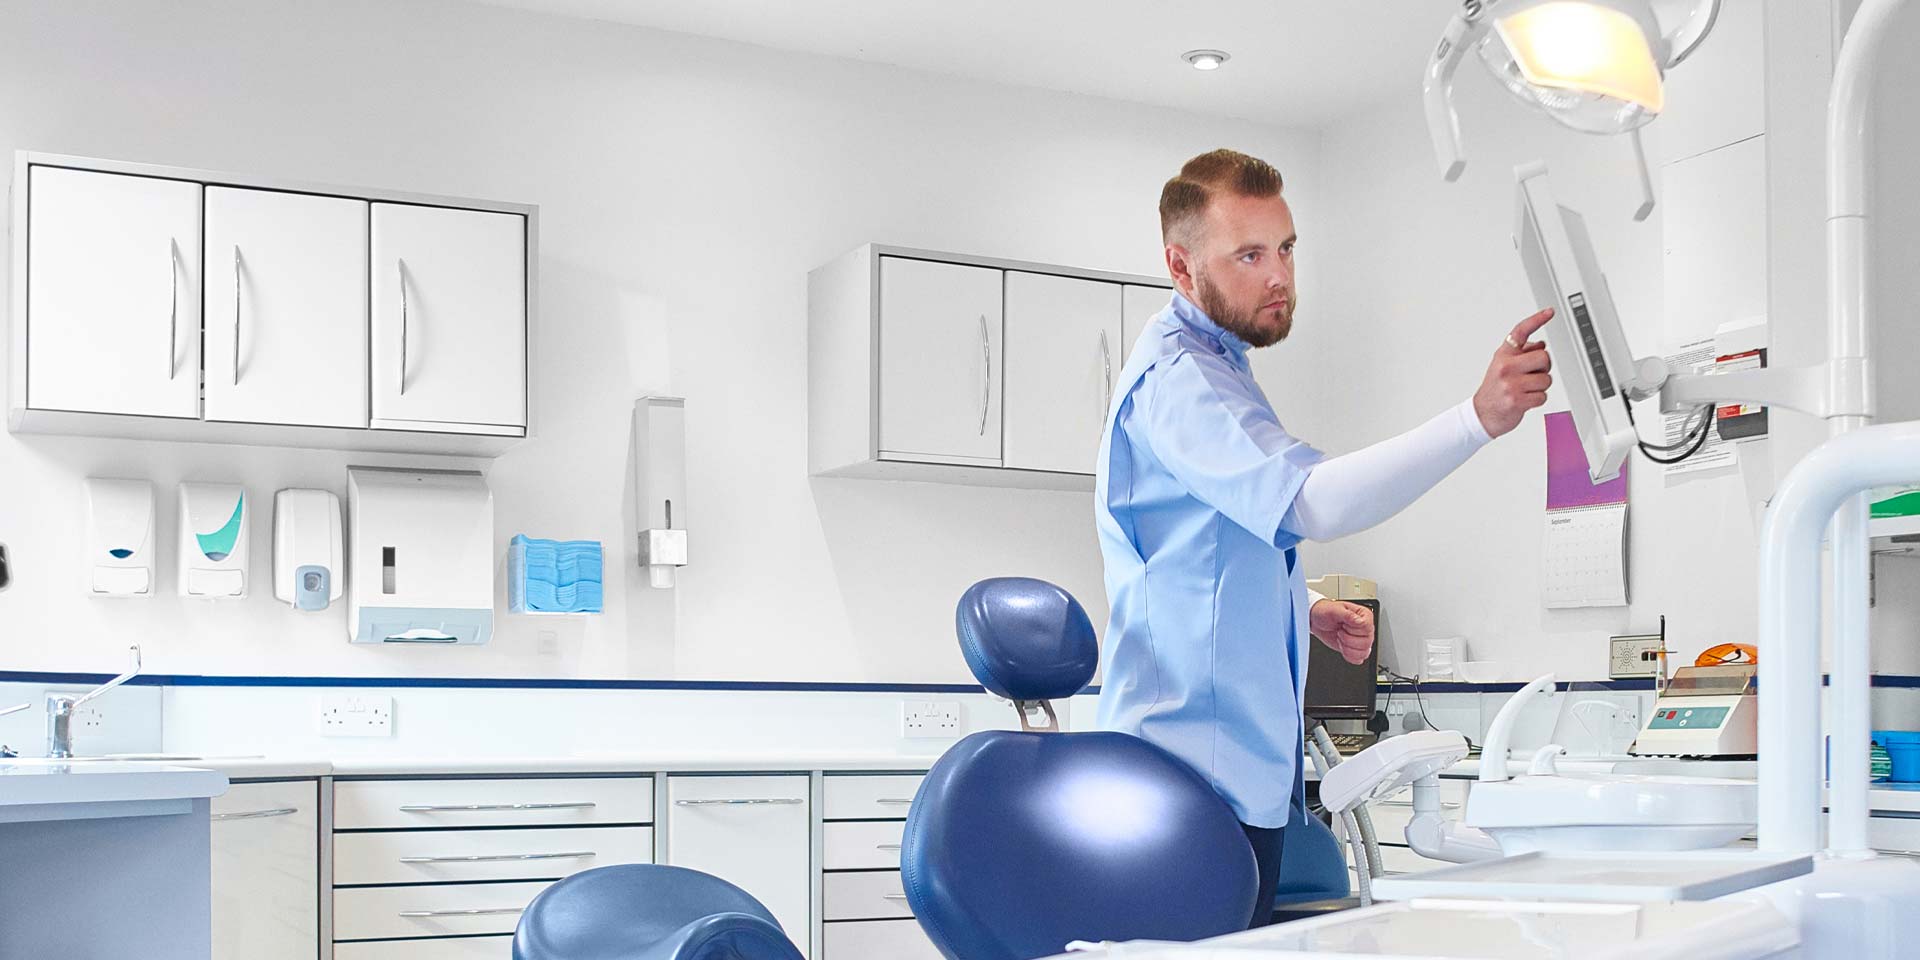 A dental professional prepares his office for patients after receiving professional services banking and financing